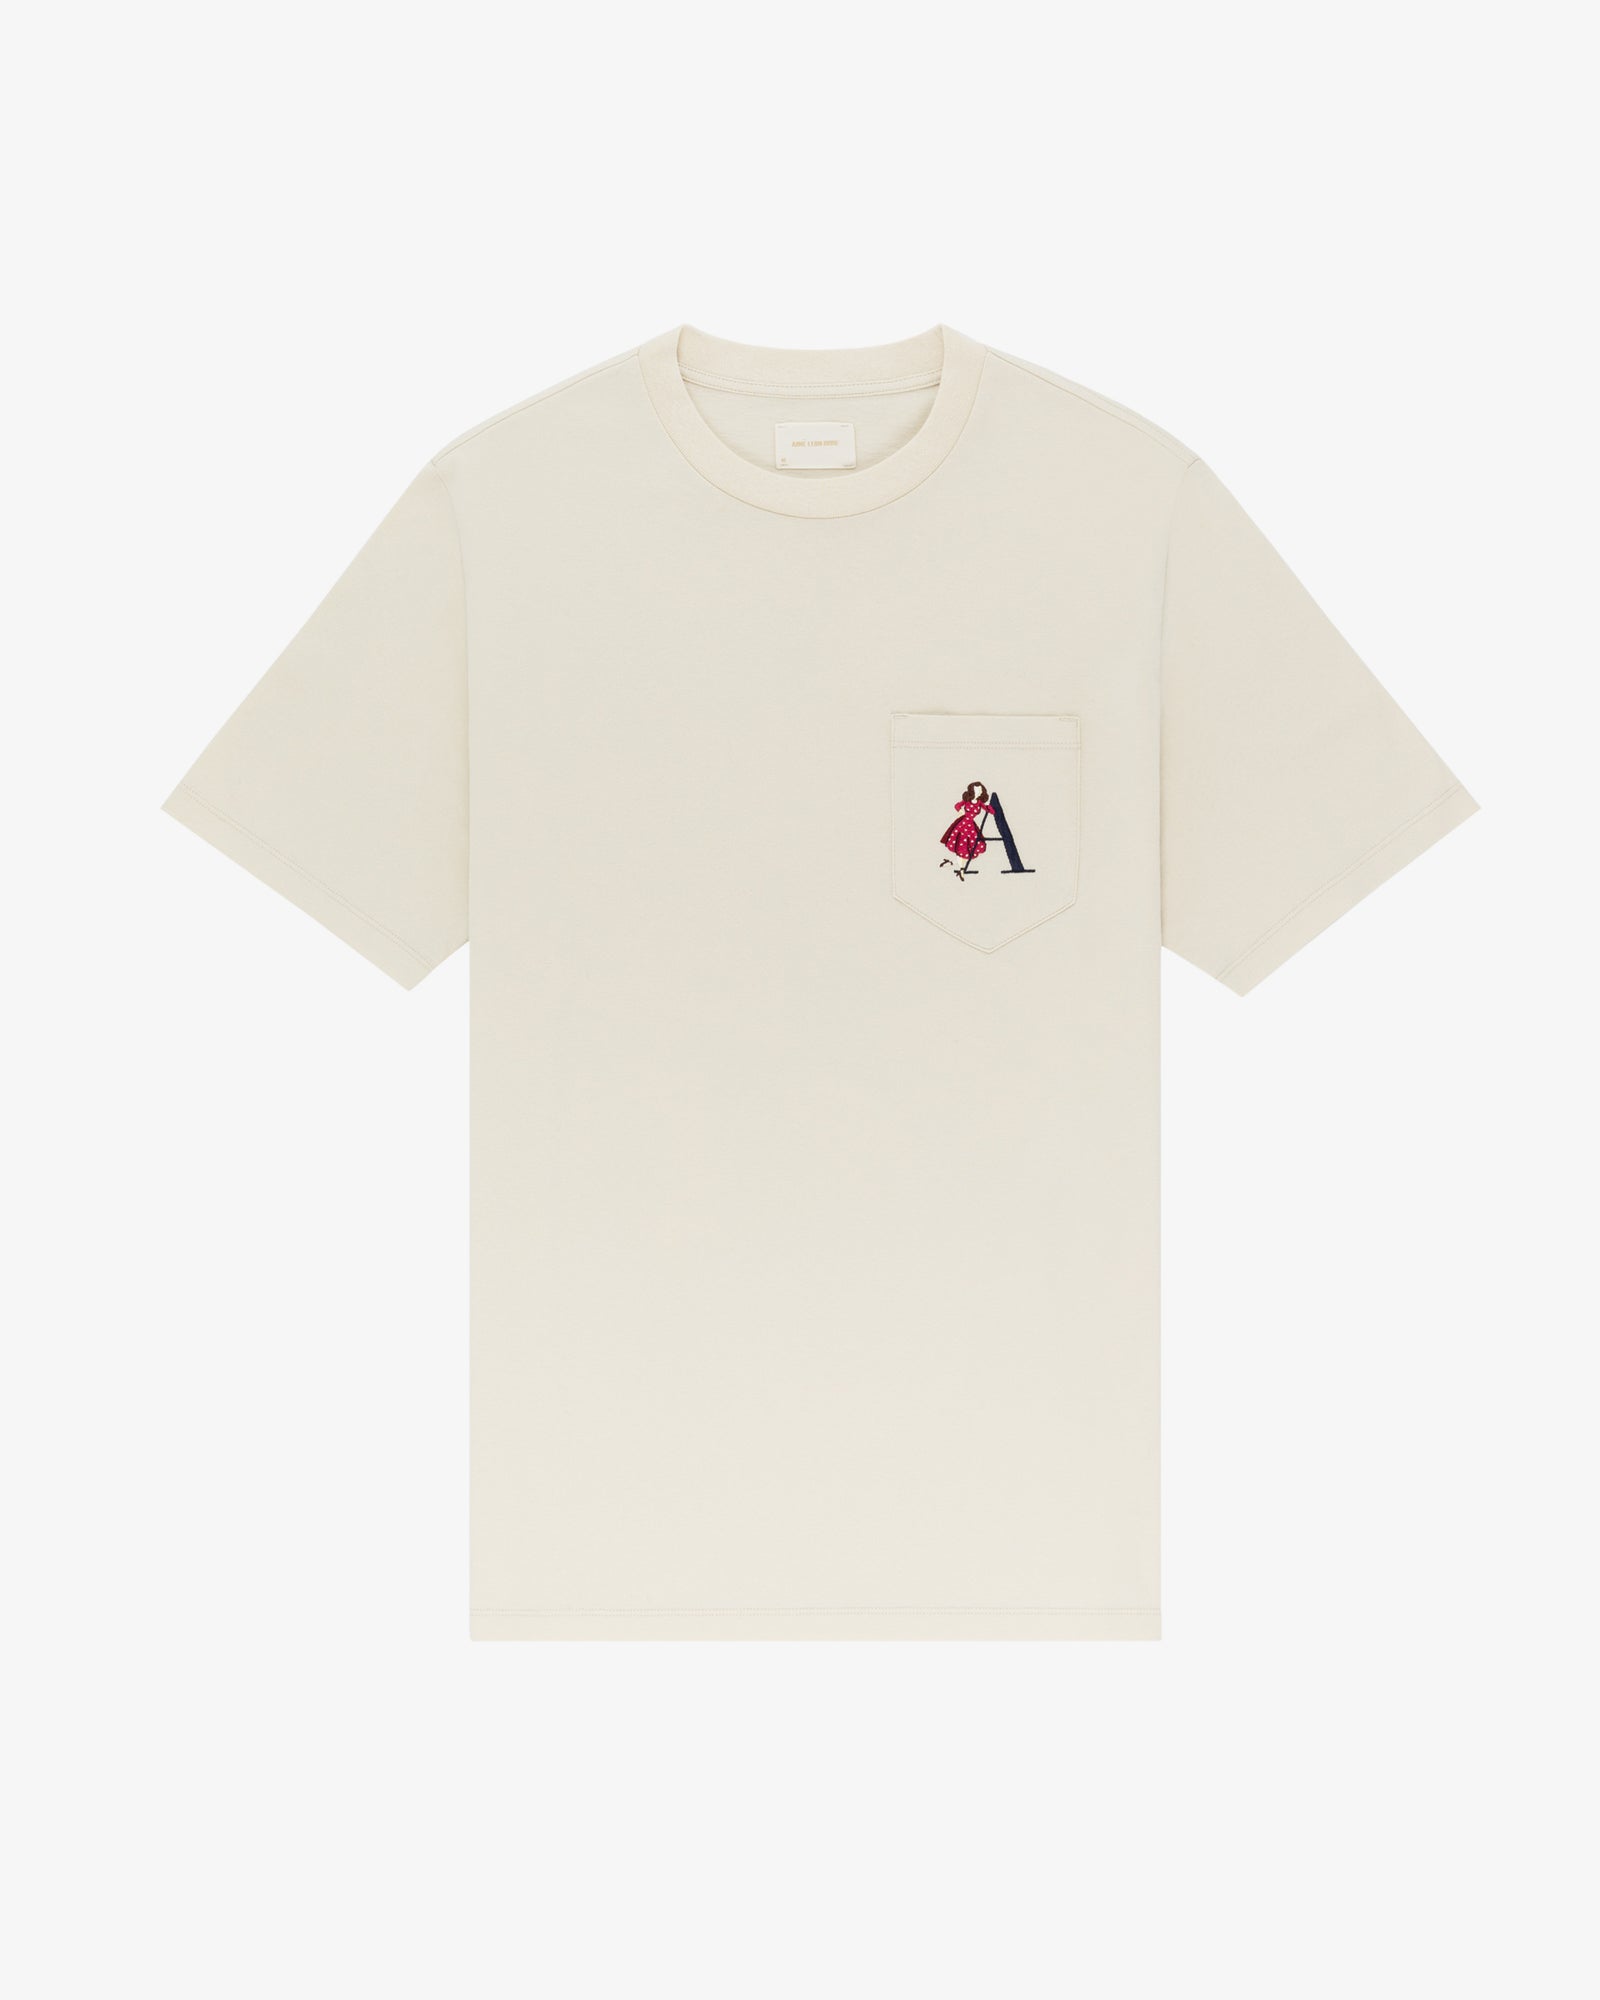 Embroidered 'A' Pocket Tee